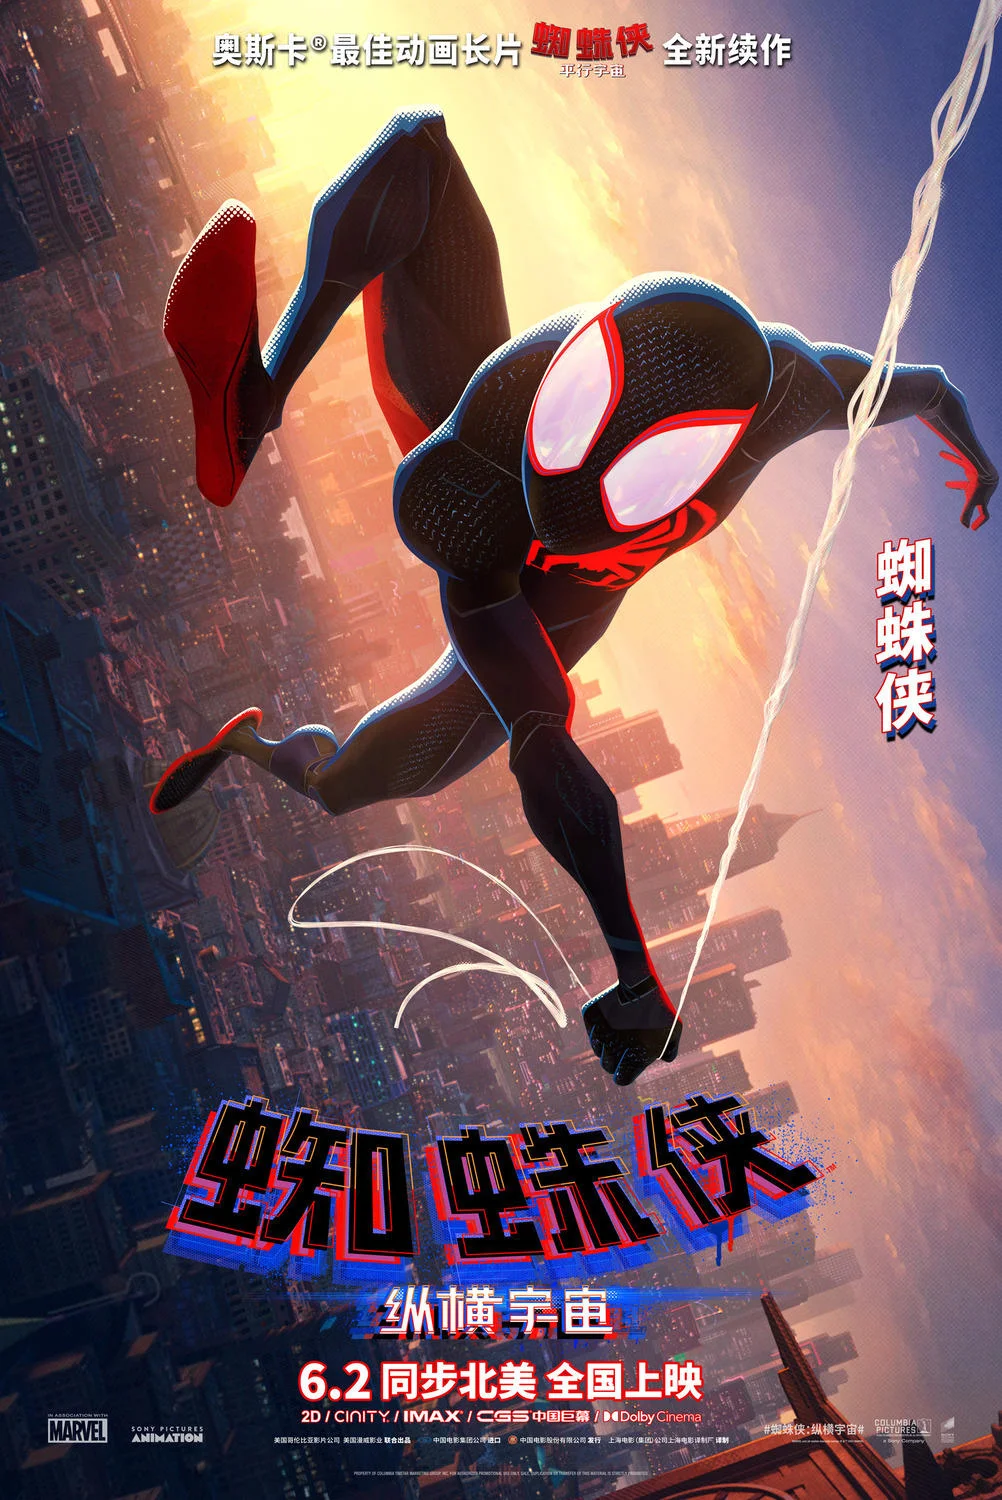 Check Out New Character Posters for 'Spider-Man: Across the Spider-Verse' -  Nerds and Beyond